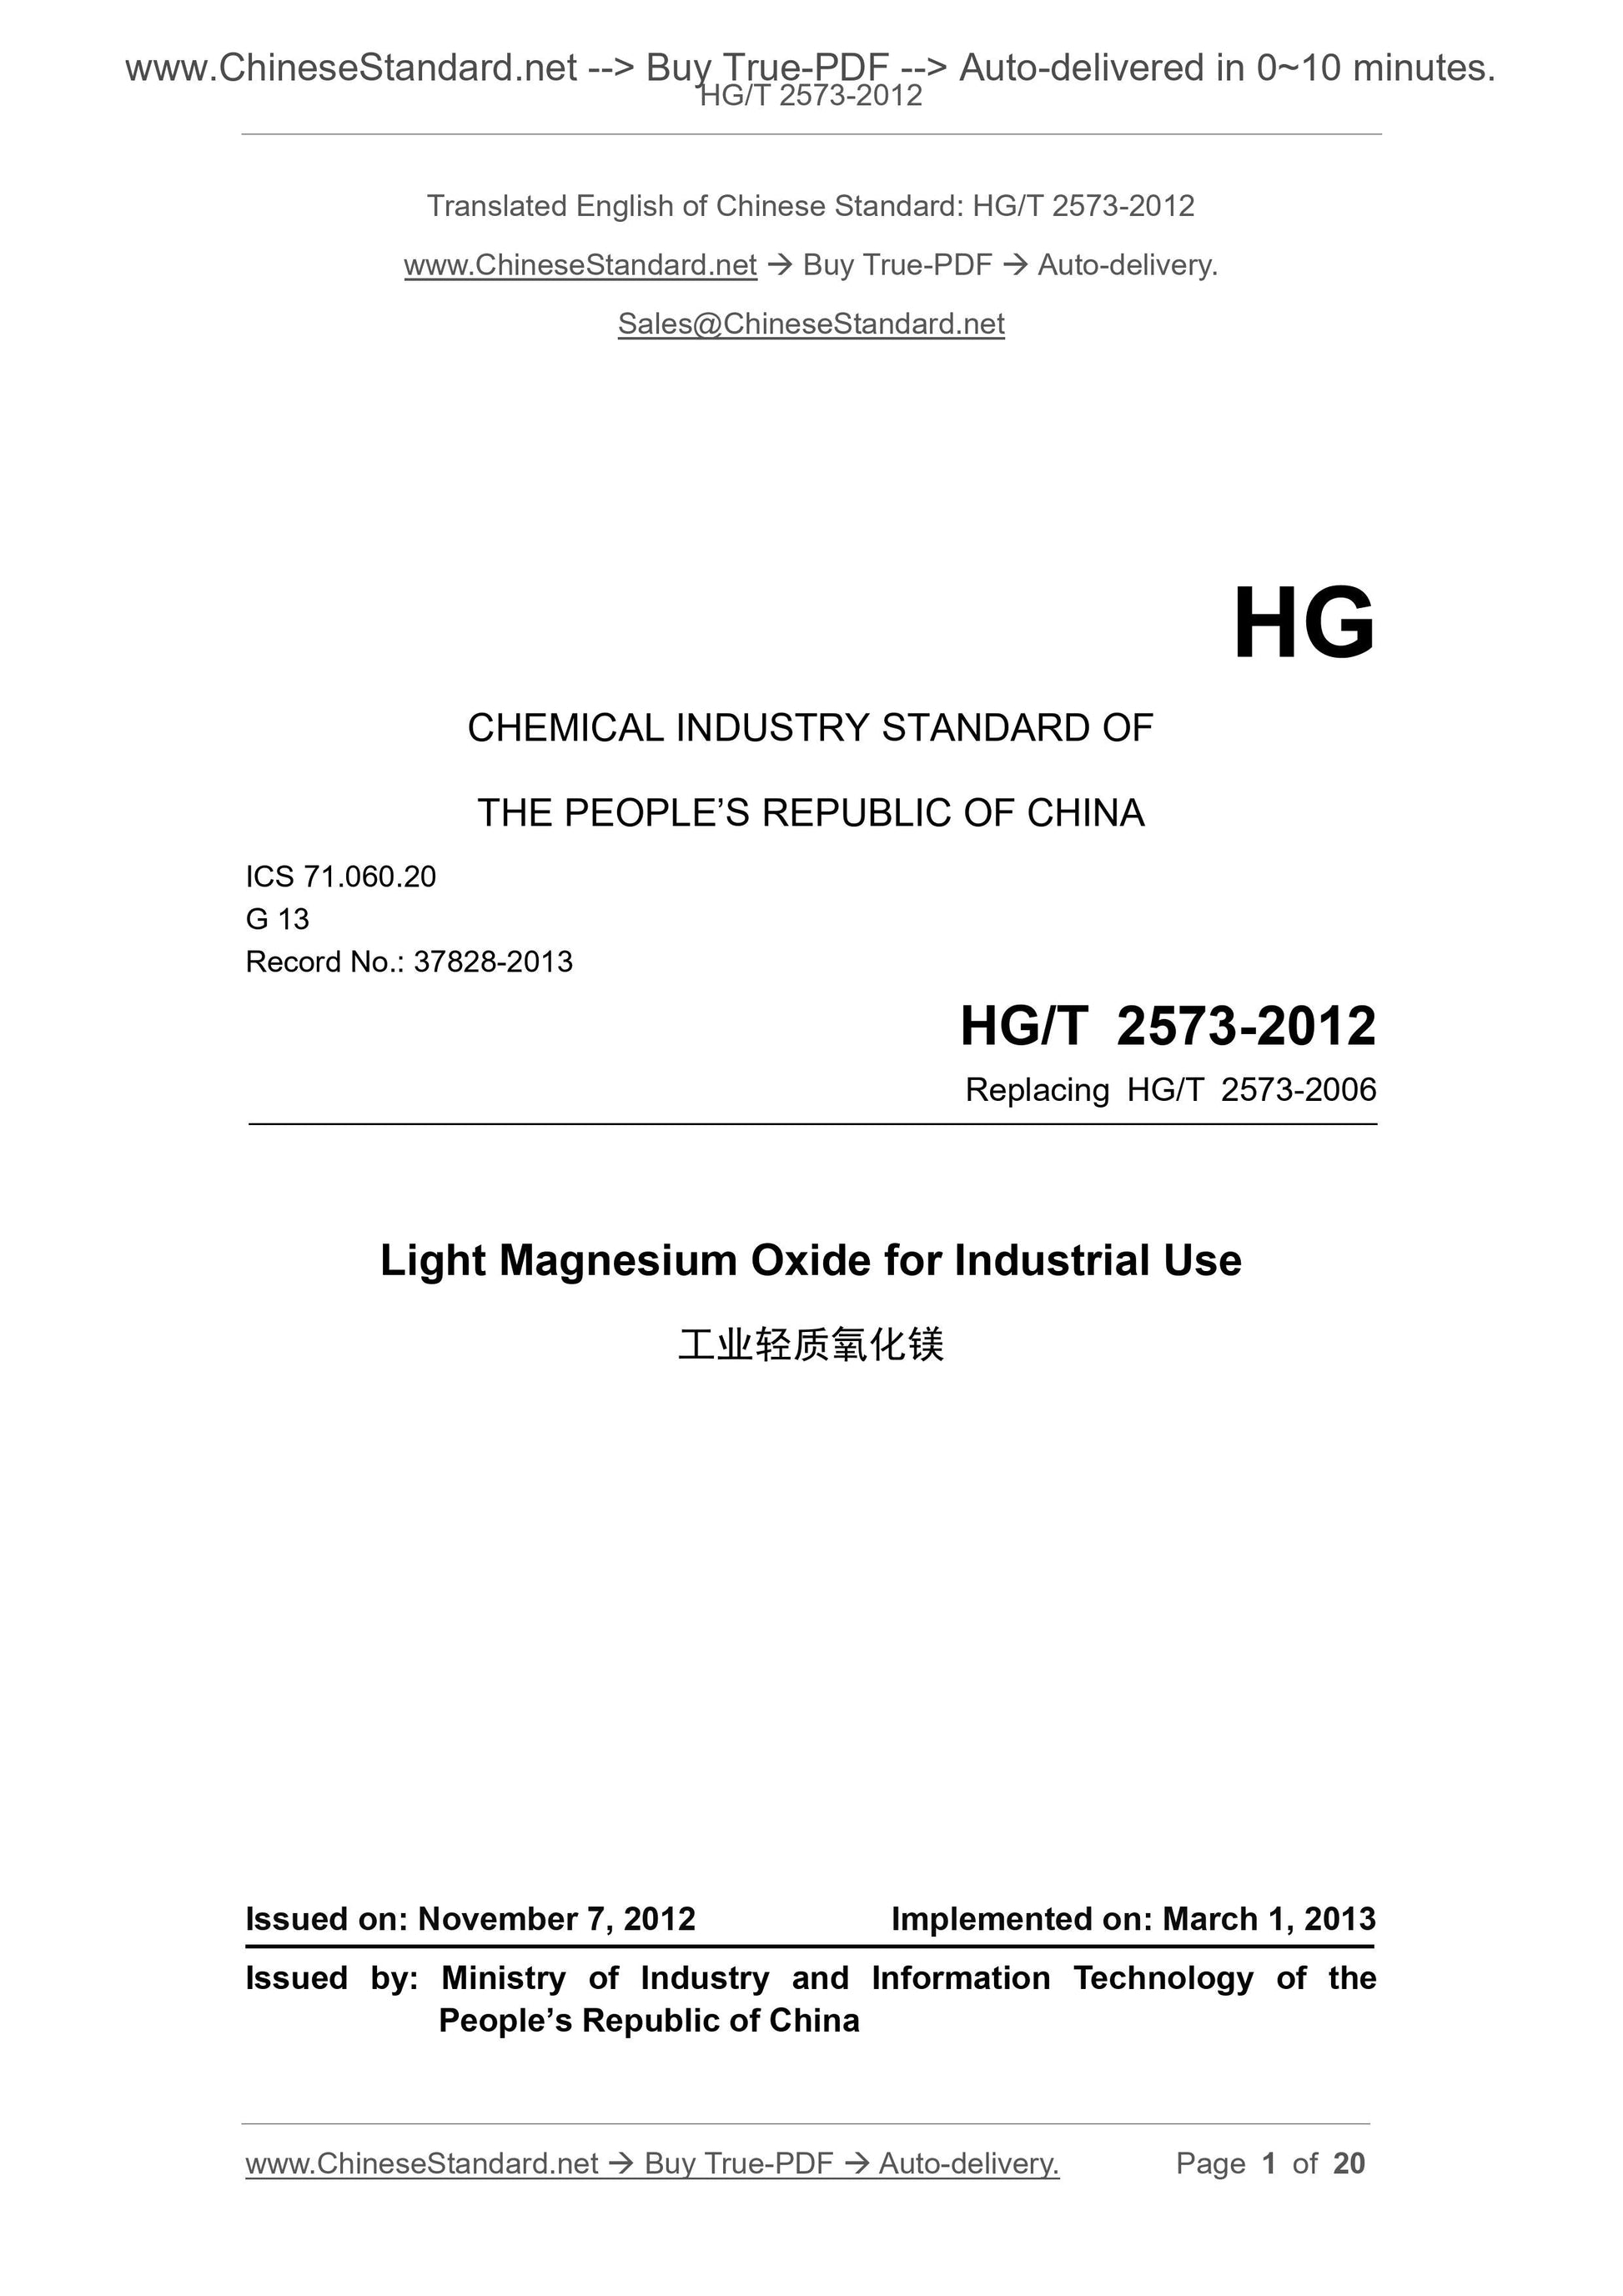 HG/T 2573-2012 Page 1